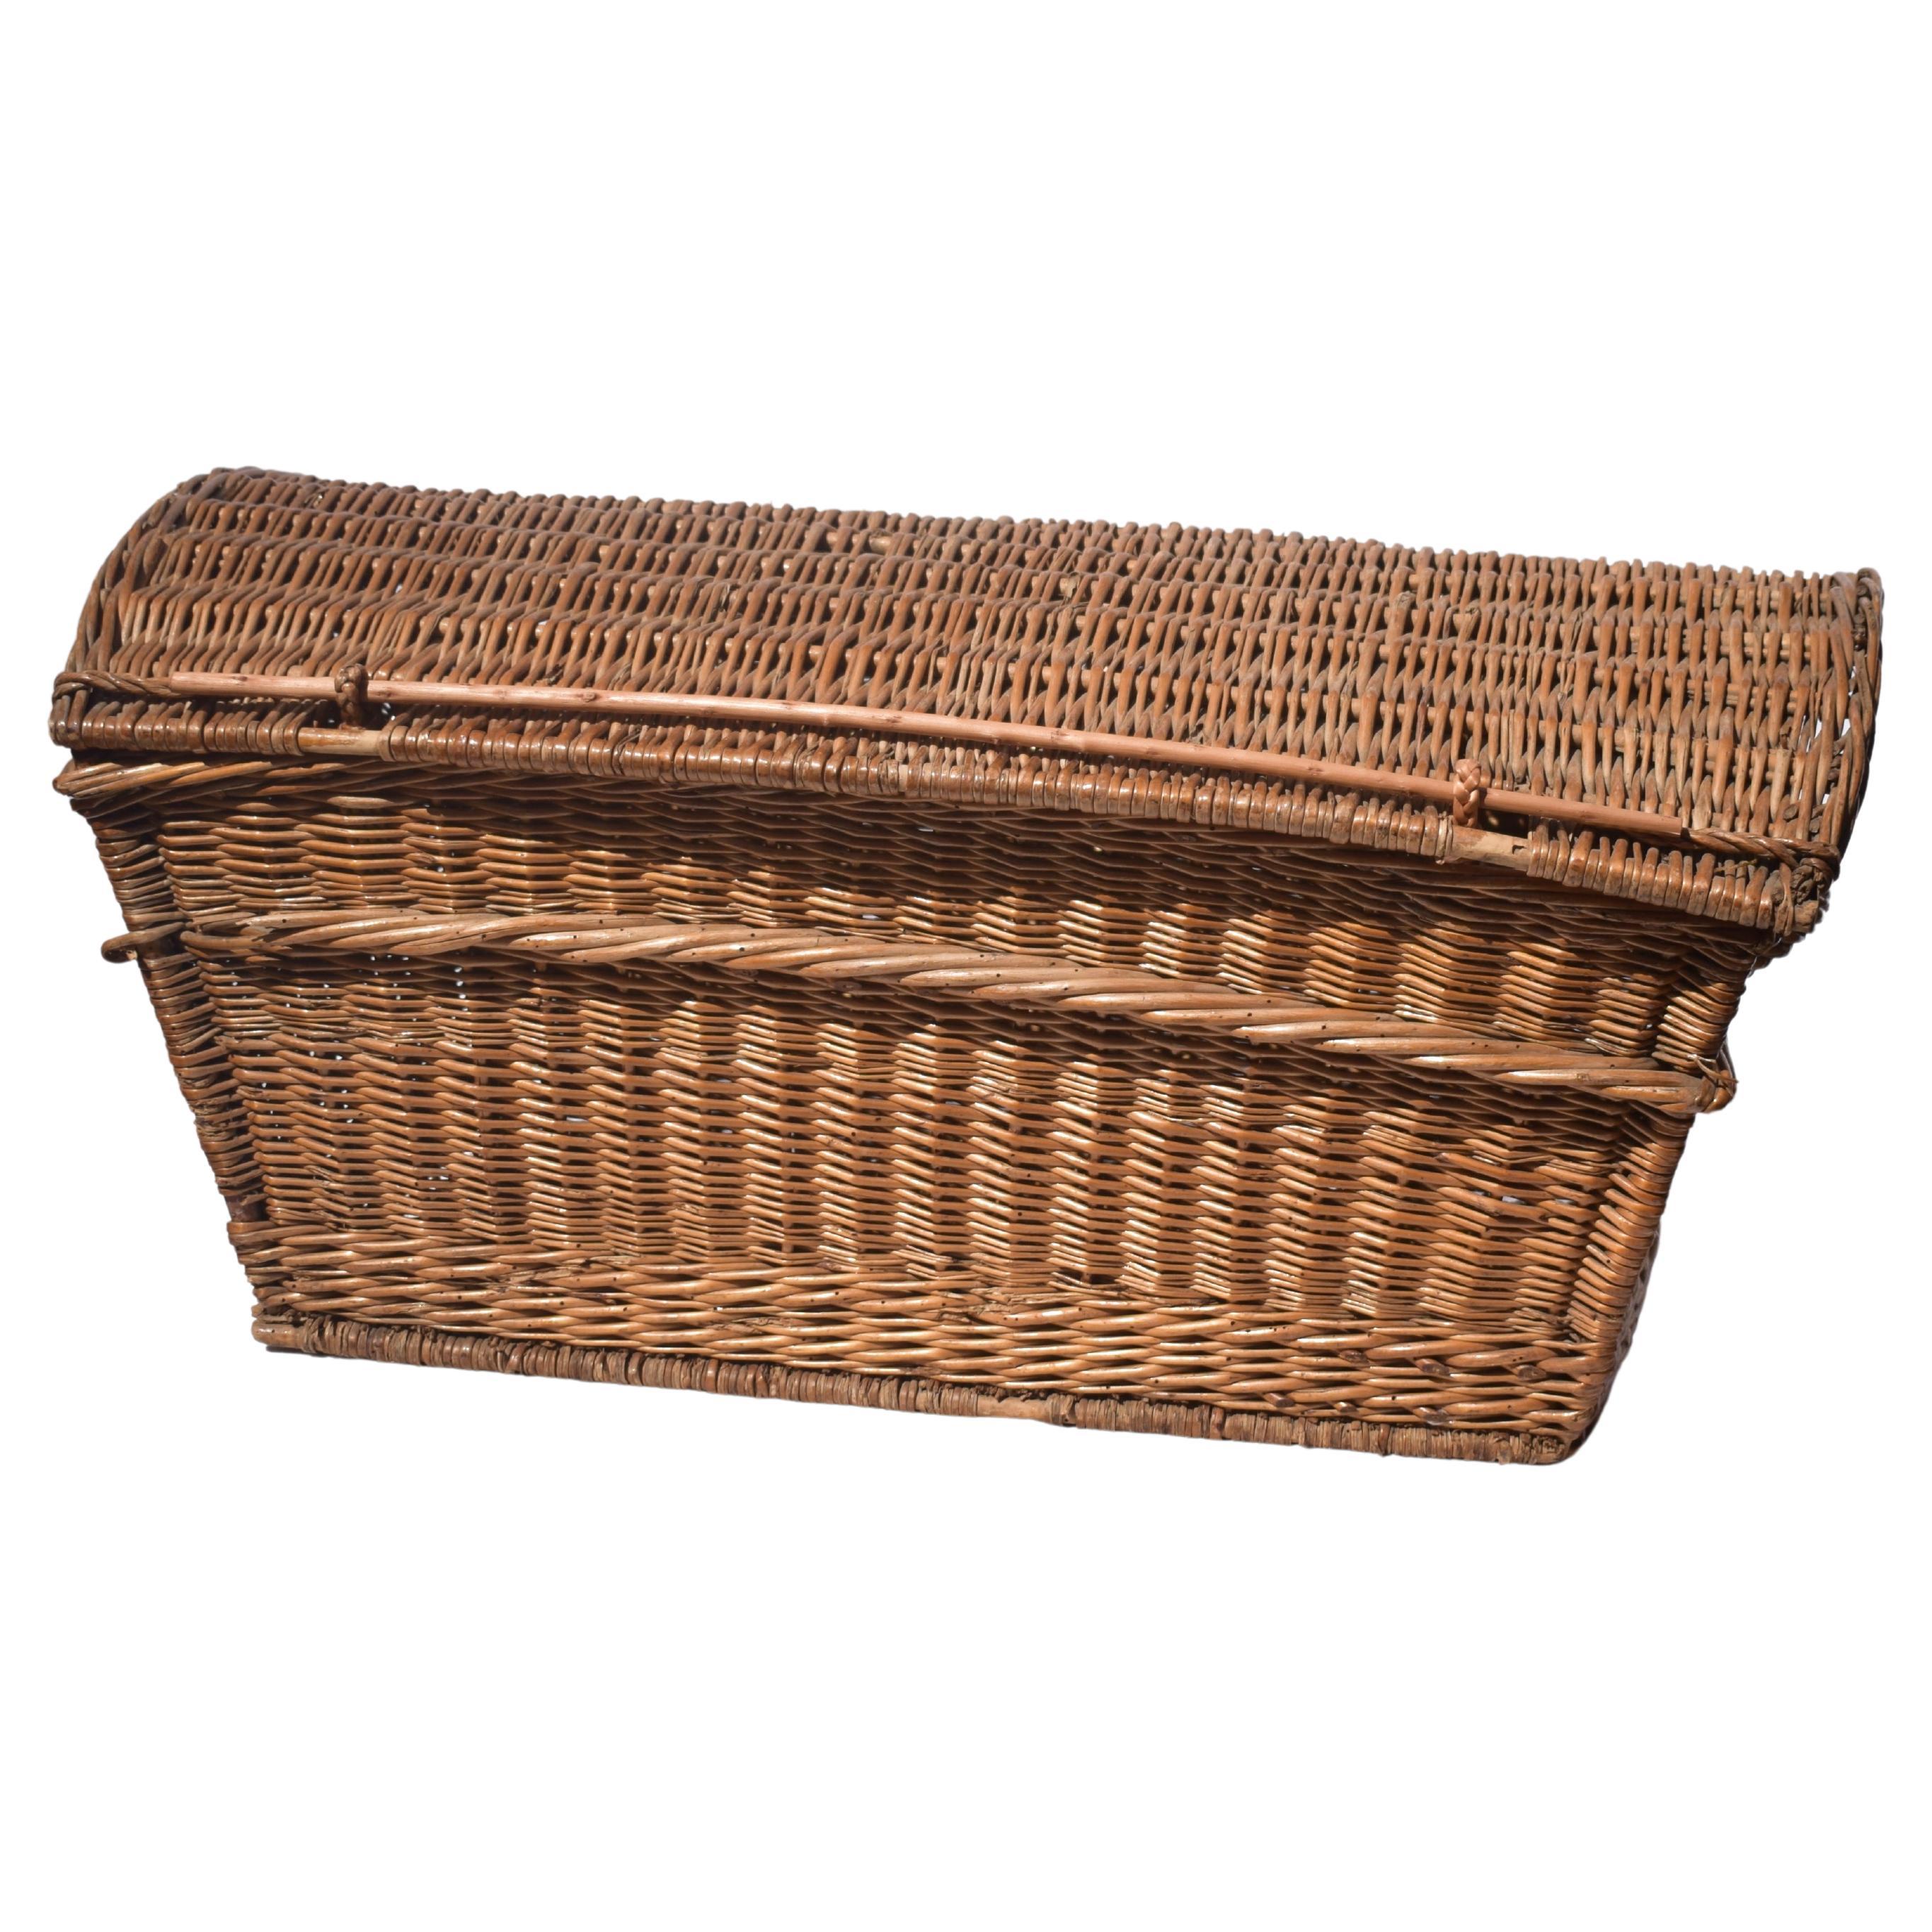 Large 19th Century French Wicker Basket with Lid